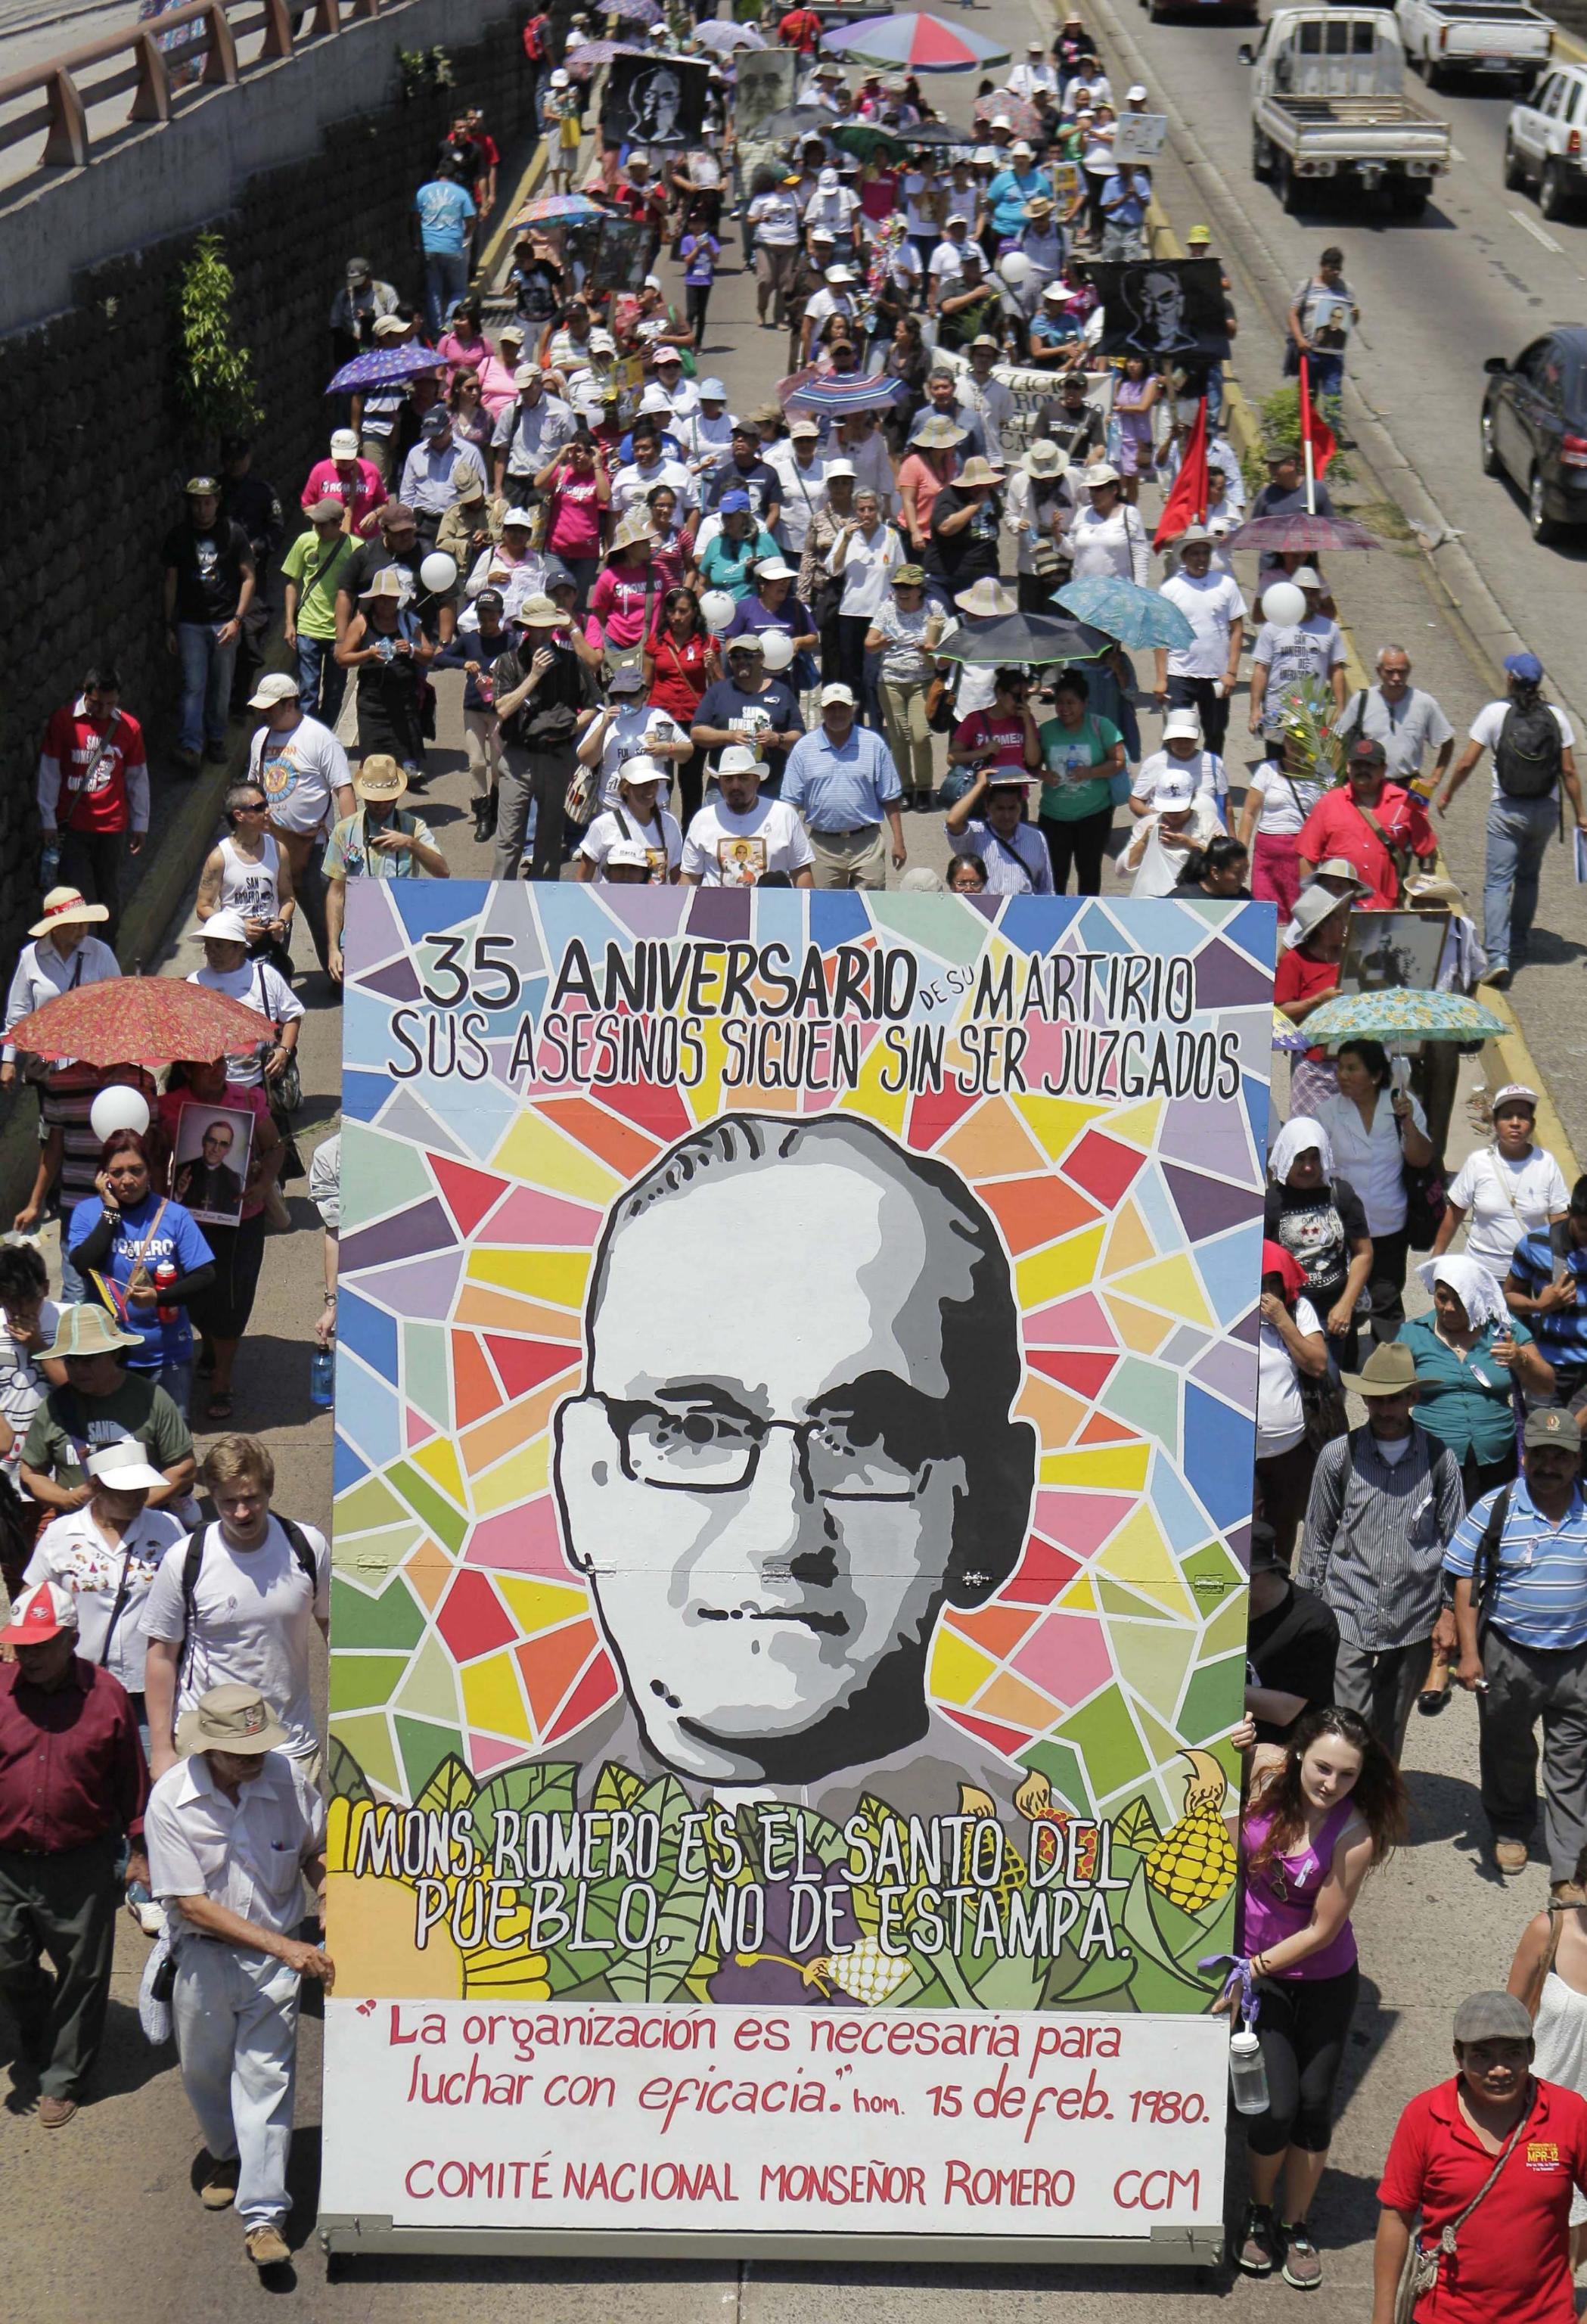 Salvadoreans take part in the march commemorating the 35th anniversary of the assassination of Archbishop Oscar Arnulfo (24th of March 1980)